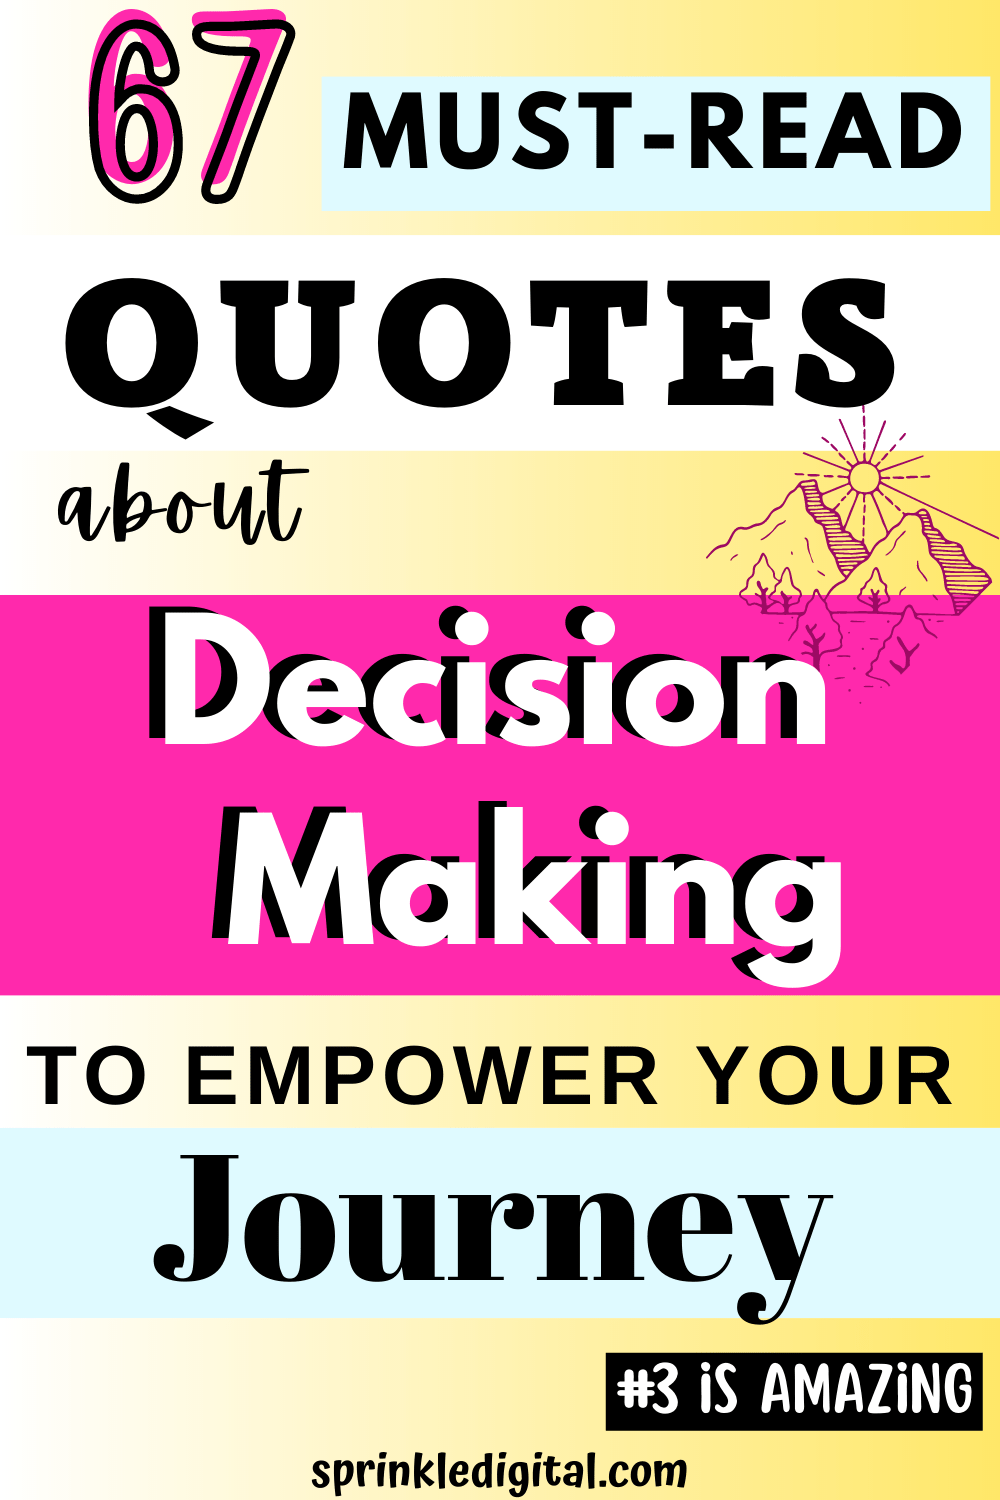 67 Must Read Quotes about Decision Making to Empower your Journey